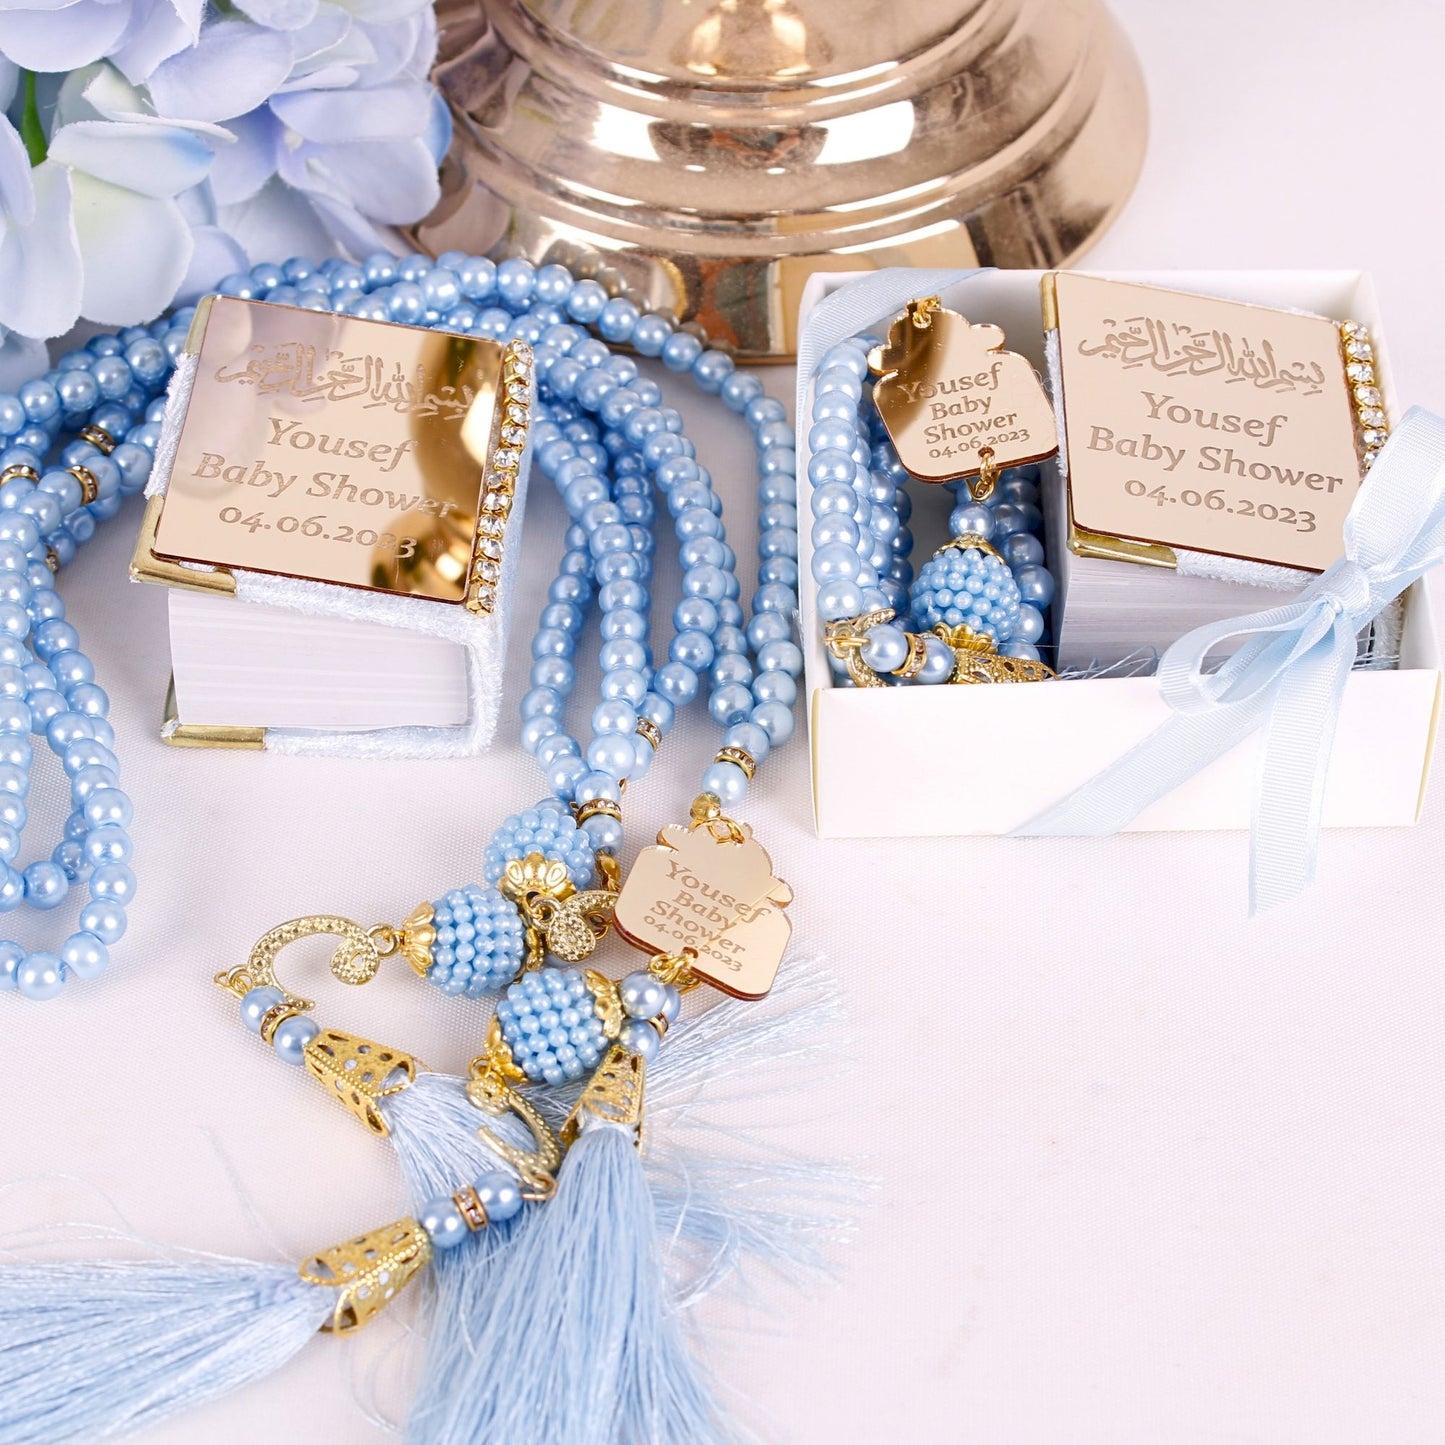 Personalized Mini Quran Pearl Prayer Beads Baby Shower Favor for Boys - Islamic Elite Favors is a handmade gift shop offering a wide variety of unique and personalized gifts for all occasions. Whether you're looking for the perfect Ramadan, Eid, Hajj, wedding gift or something special for a birthday, baby shower or anniversary, we have something for everyone. High quality, made with love.